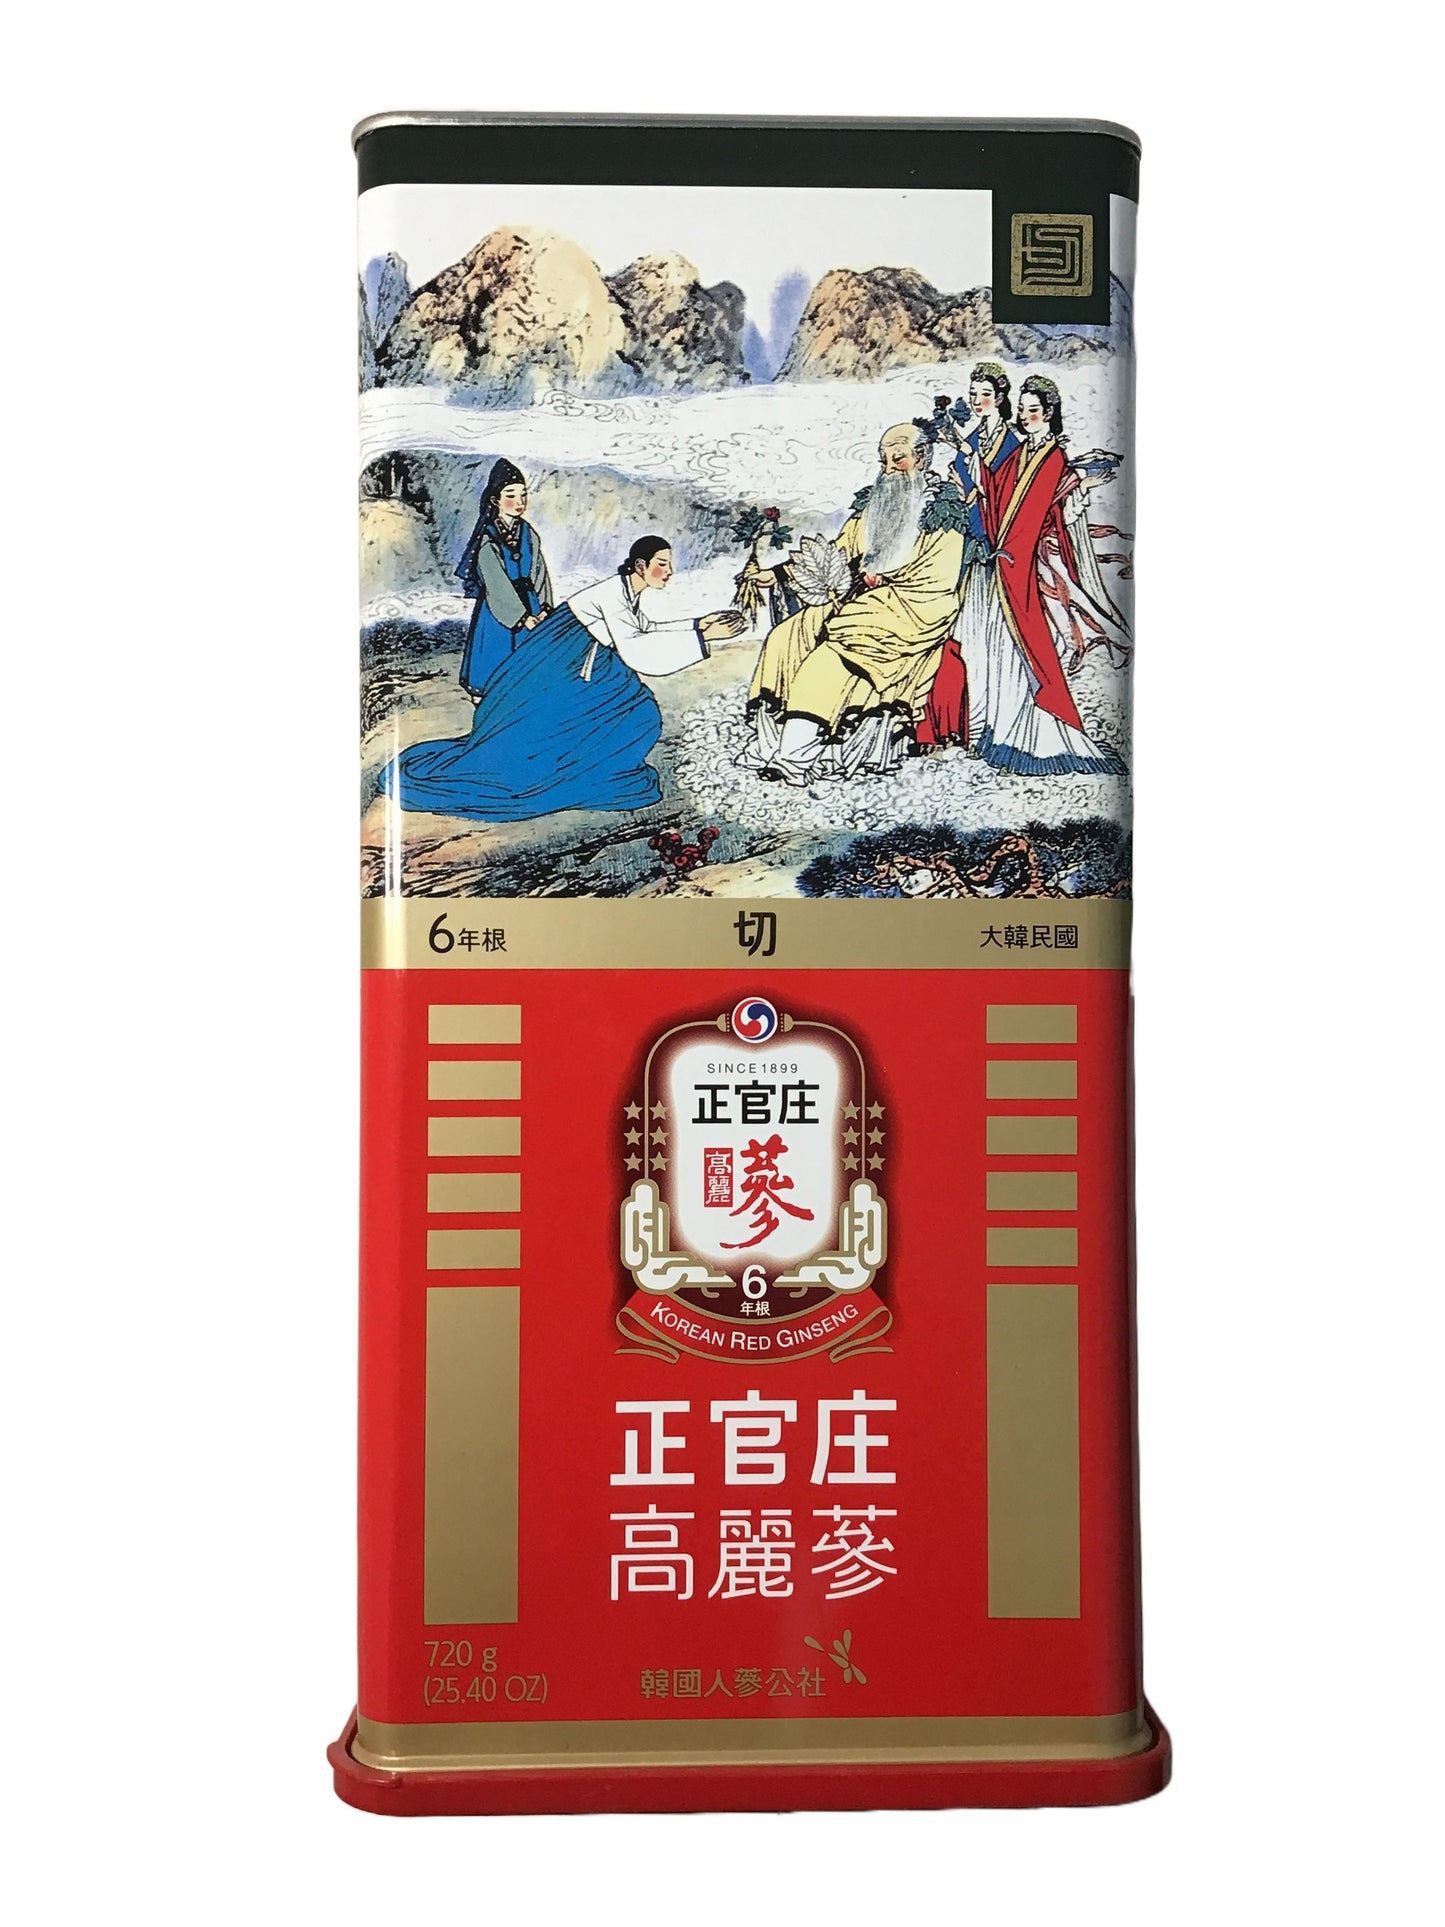 CHEONG KWAN JANG 6yr Old Korean Red Ginseng Canned 720g Roots (Cut) 正官庄 高丽参切参